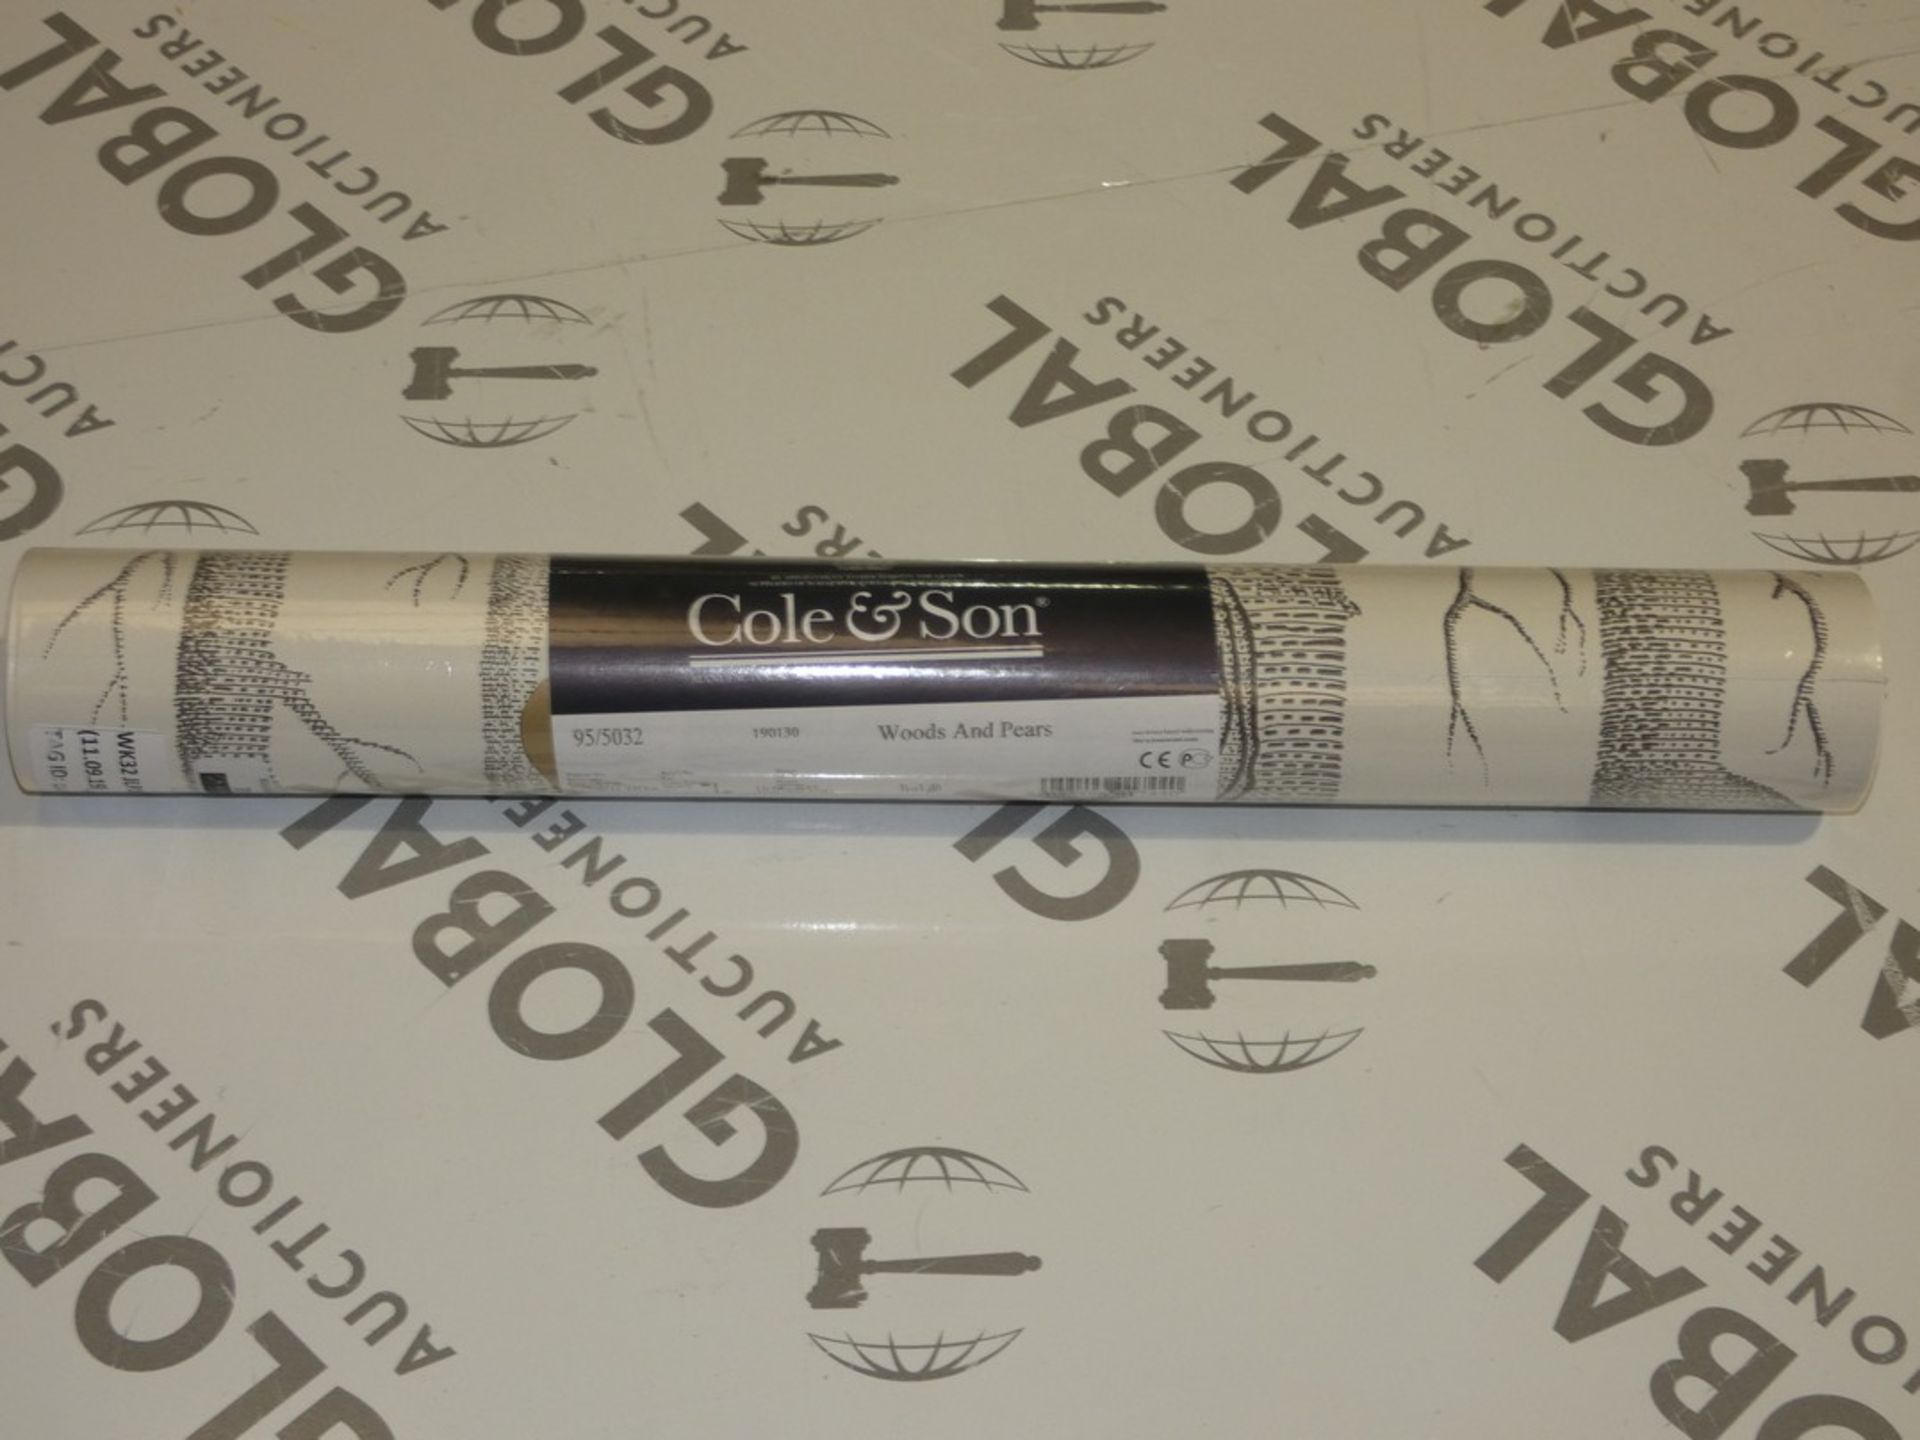 Brand New and Sealed Roll of Cole and Son Woods and Pairs 10.05m x 53cm Wallpaper RRP £85 (